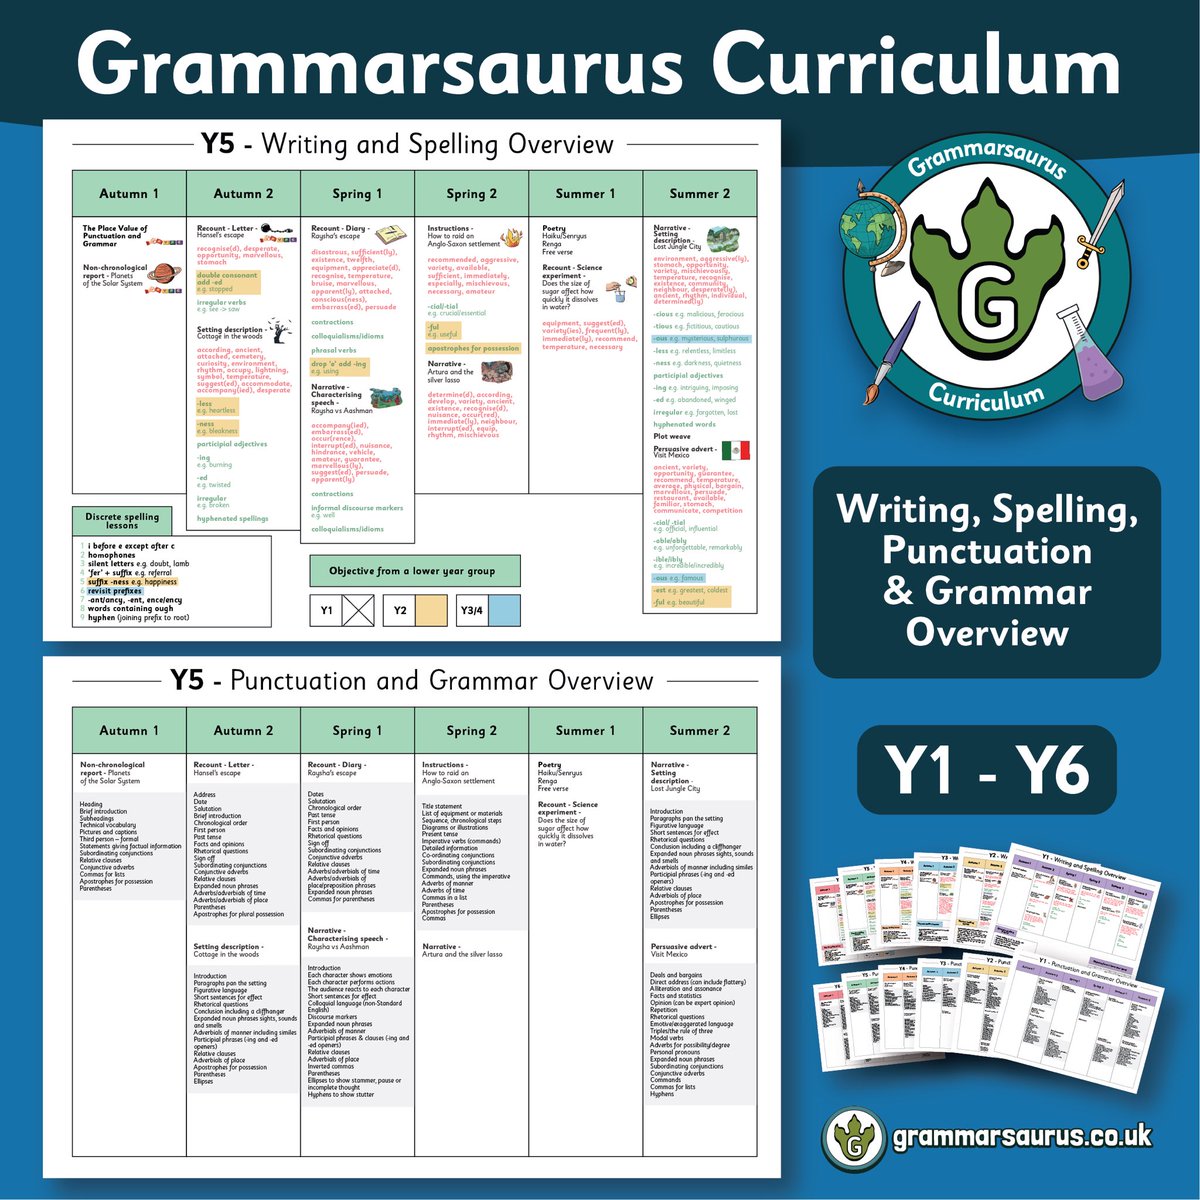 🎉 It's finally here & I might just cry! 🙌 After years in the making, I'm beyond excited to share this with you all! 💫 Introducing the Grammarsaurus Writing, Spelling, Punctuation, and Grammar Overview – the backbone of all our writing units! 📝✨